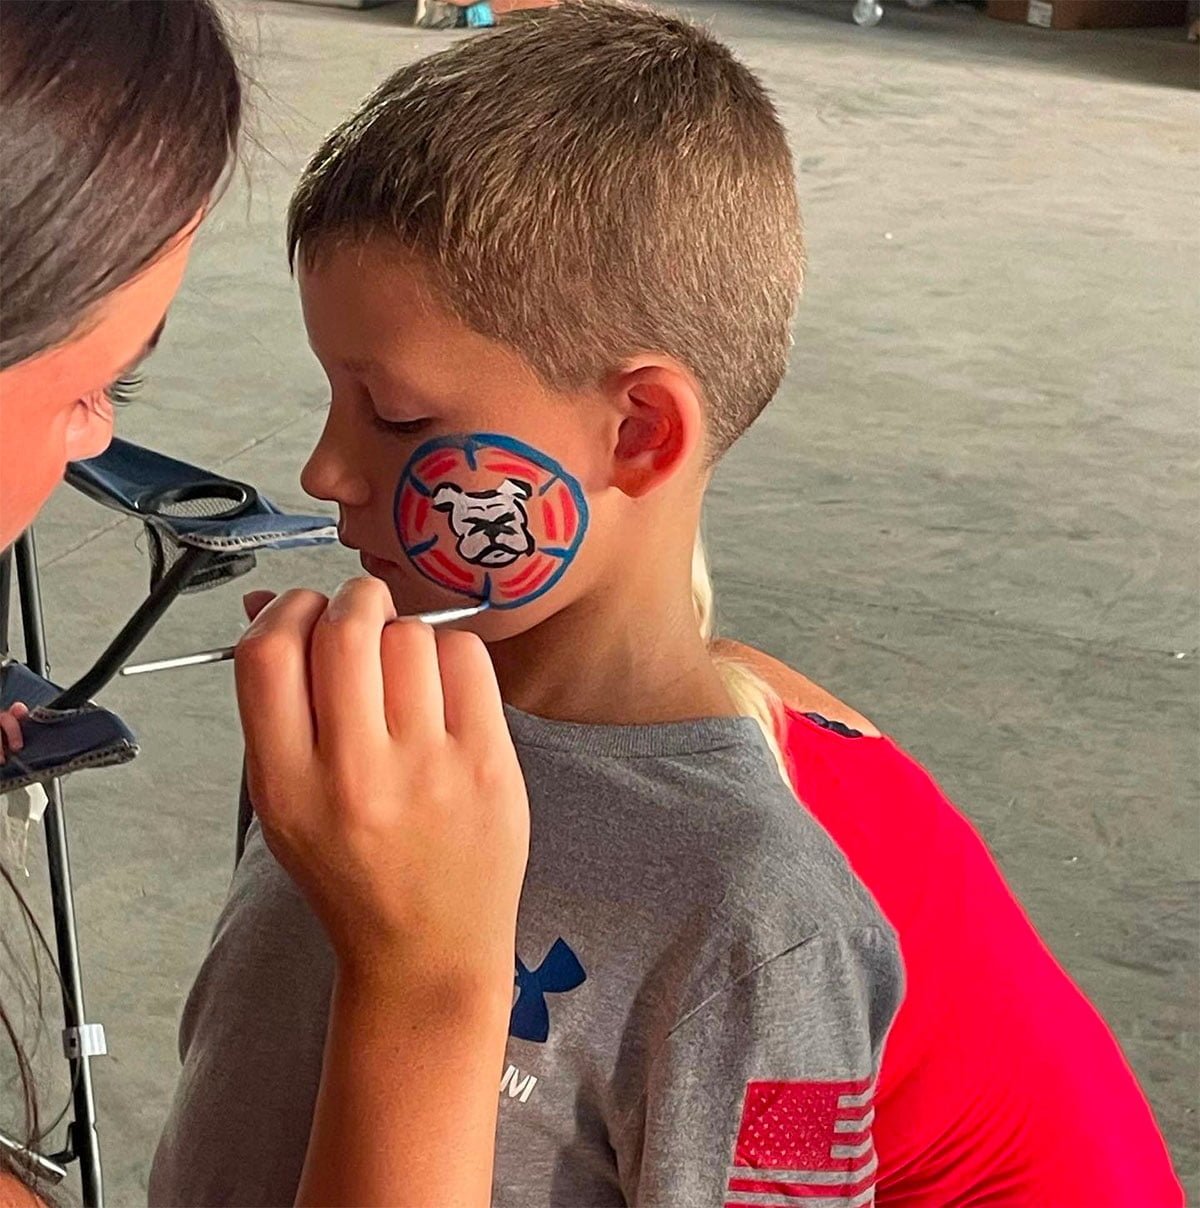 A young boy getting his face painted of a bulldog logo by a woman.